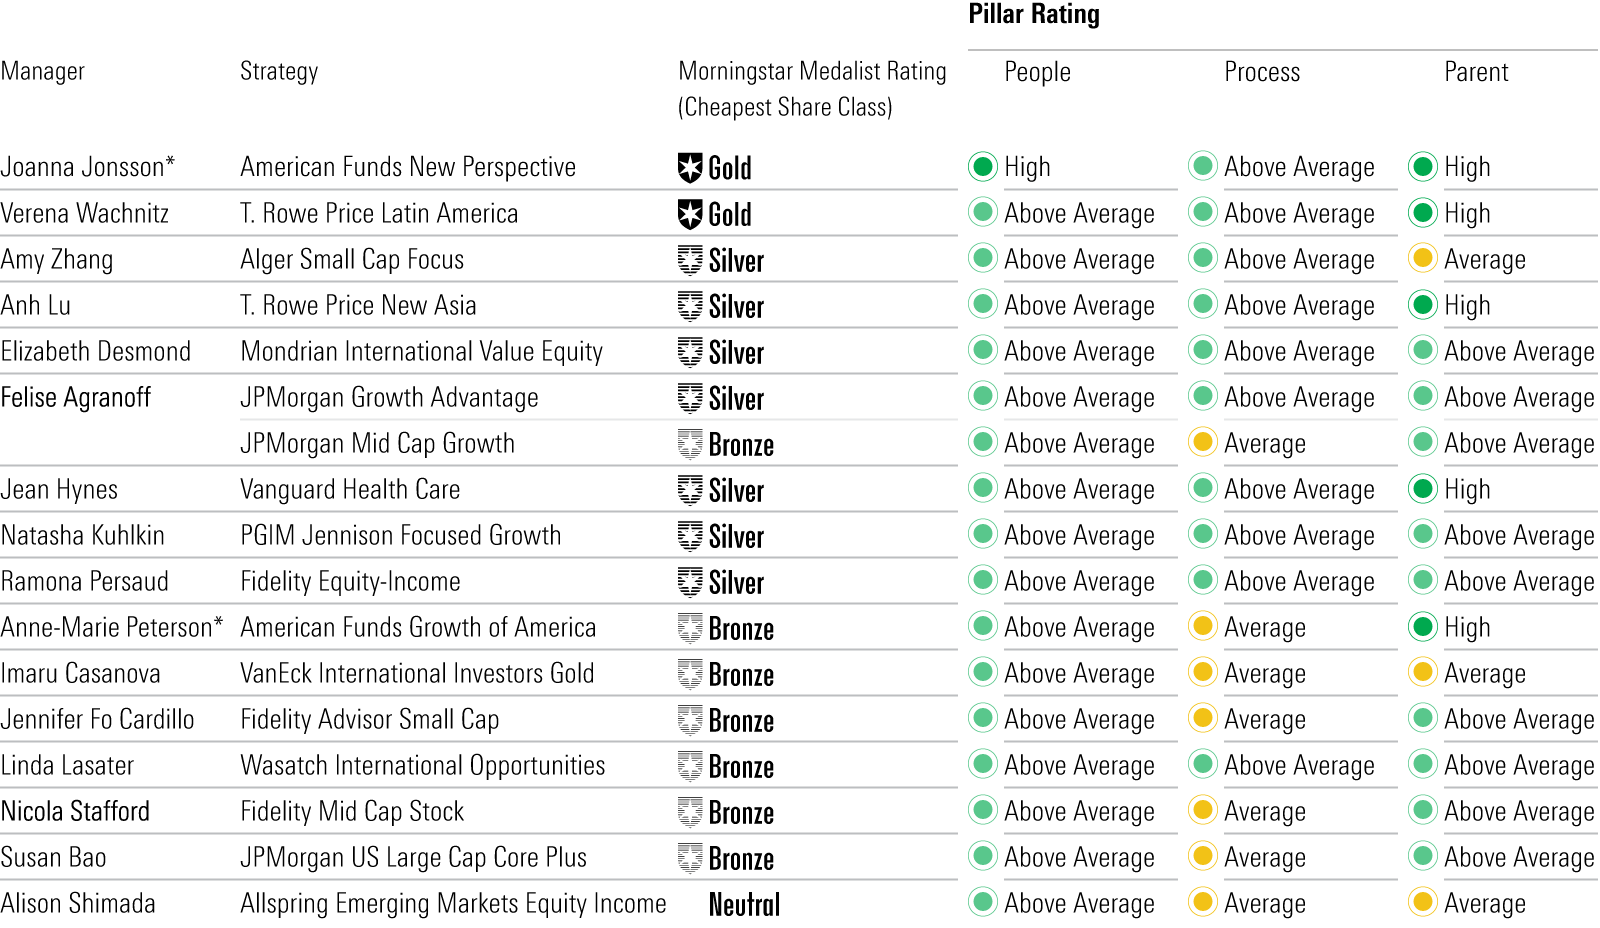 A table of the lead female equity managers that earn High or Above Average People ratings.